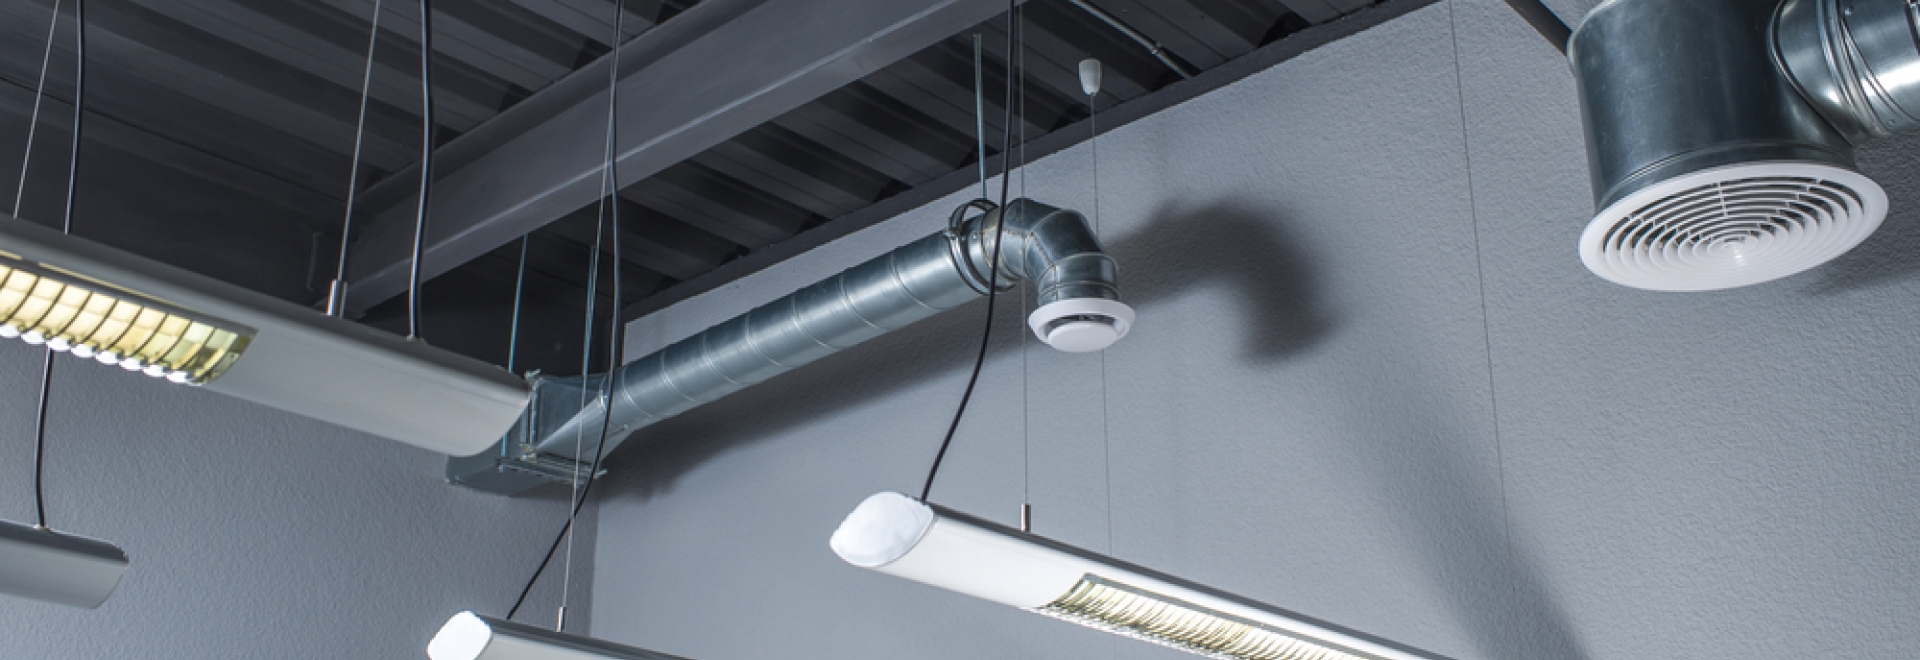 commercial ventilation in office or warehouse